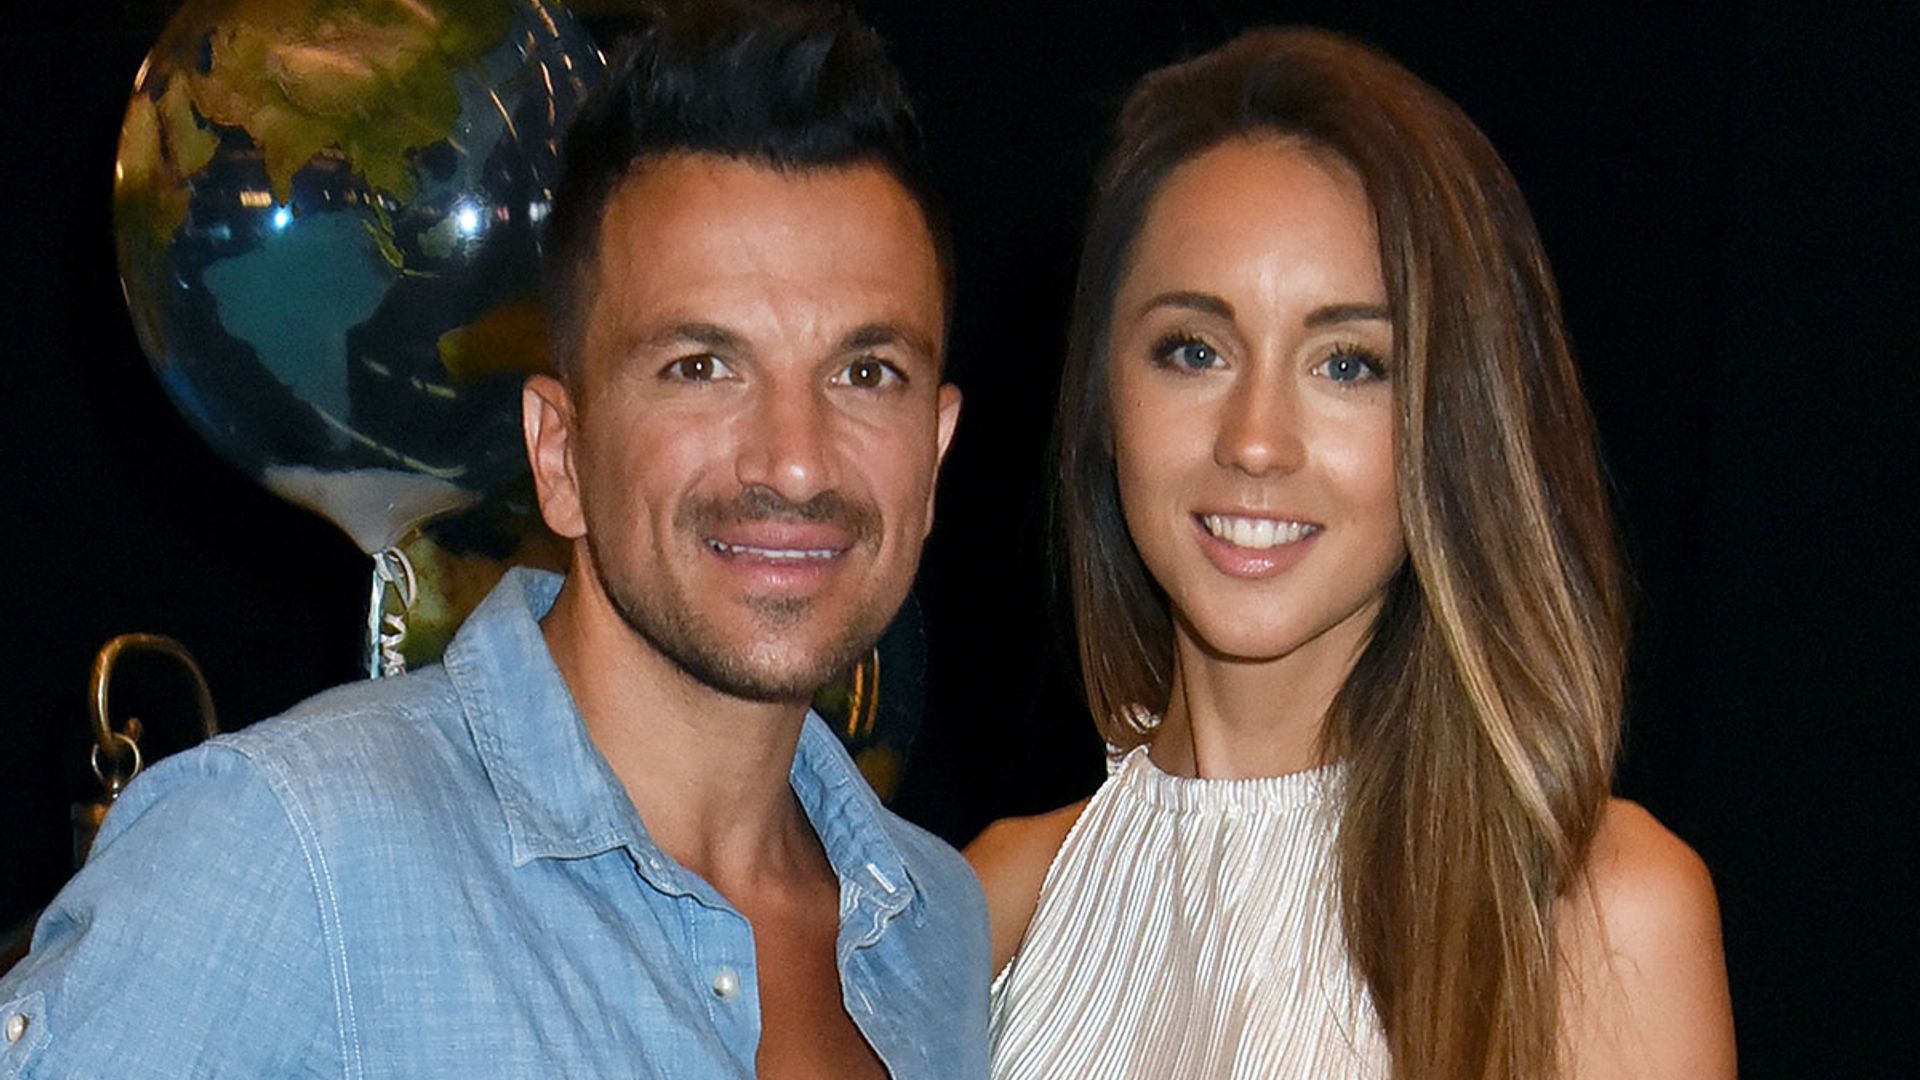 Peter Andre admits it would be 'irresponsible' to not stockpile amid coronavirus concern